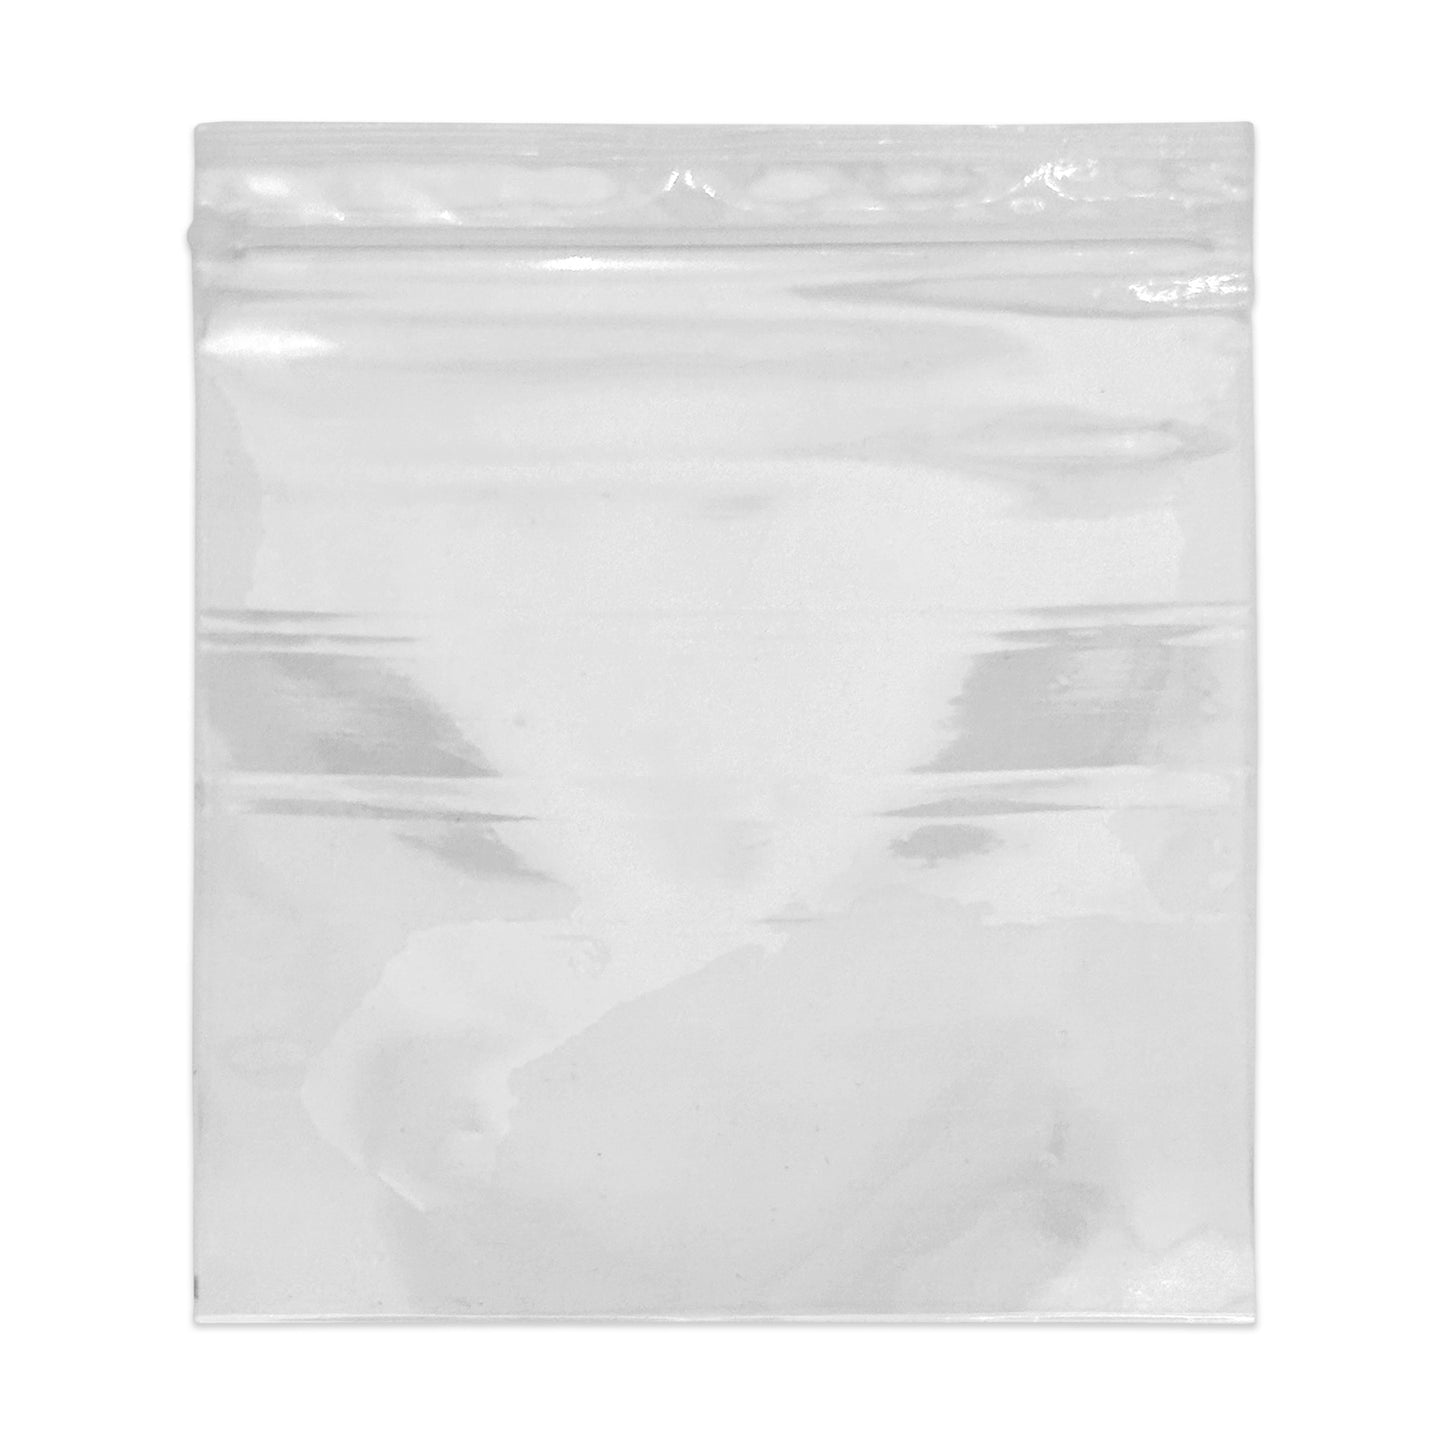 3 15/16" x 5 15/16" Resealable 2.5 Mil Thick Clear Zip Plastic Bag